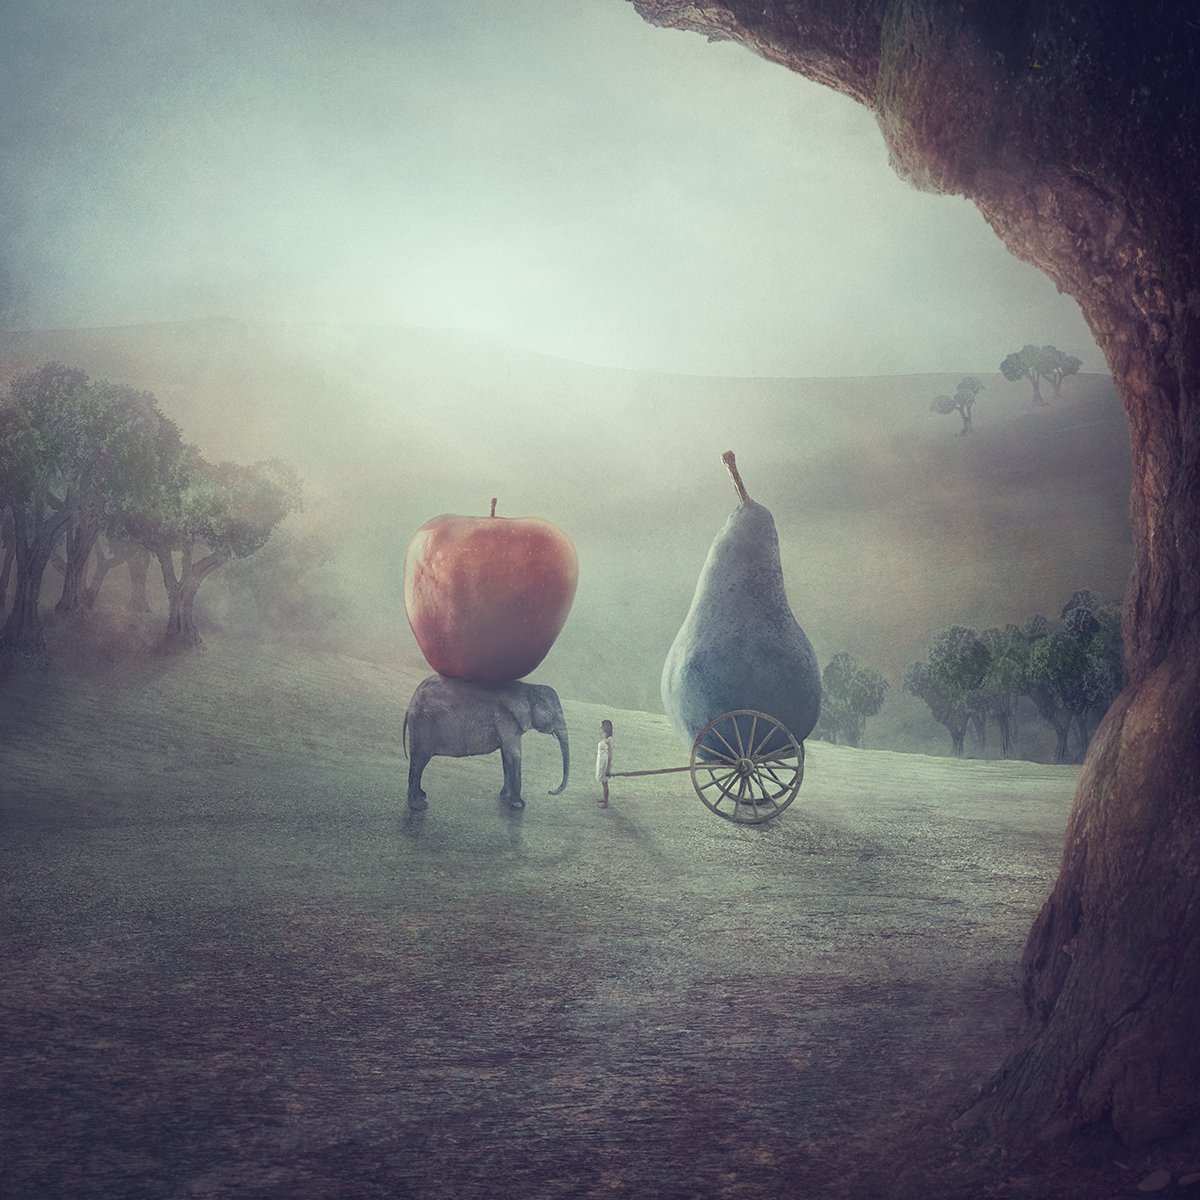 Dreaming of Red, limited edition of 5 by Nikolina Petolas